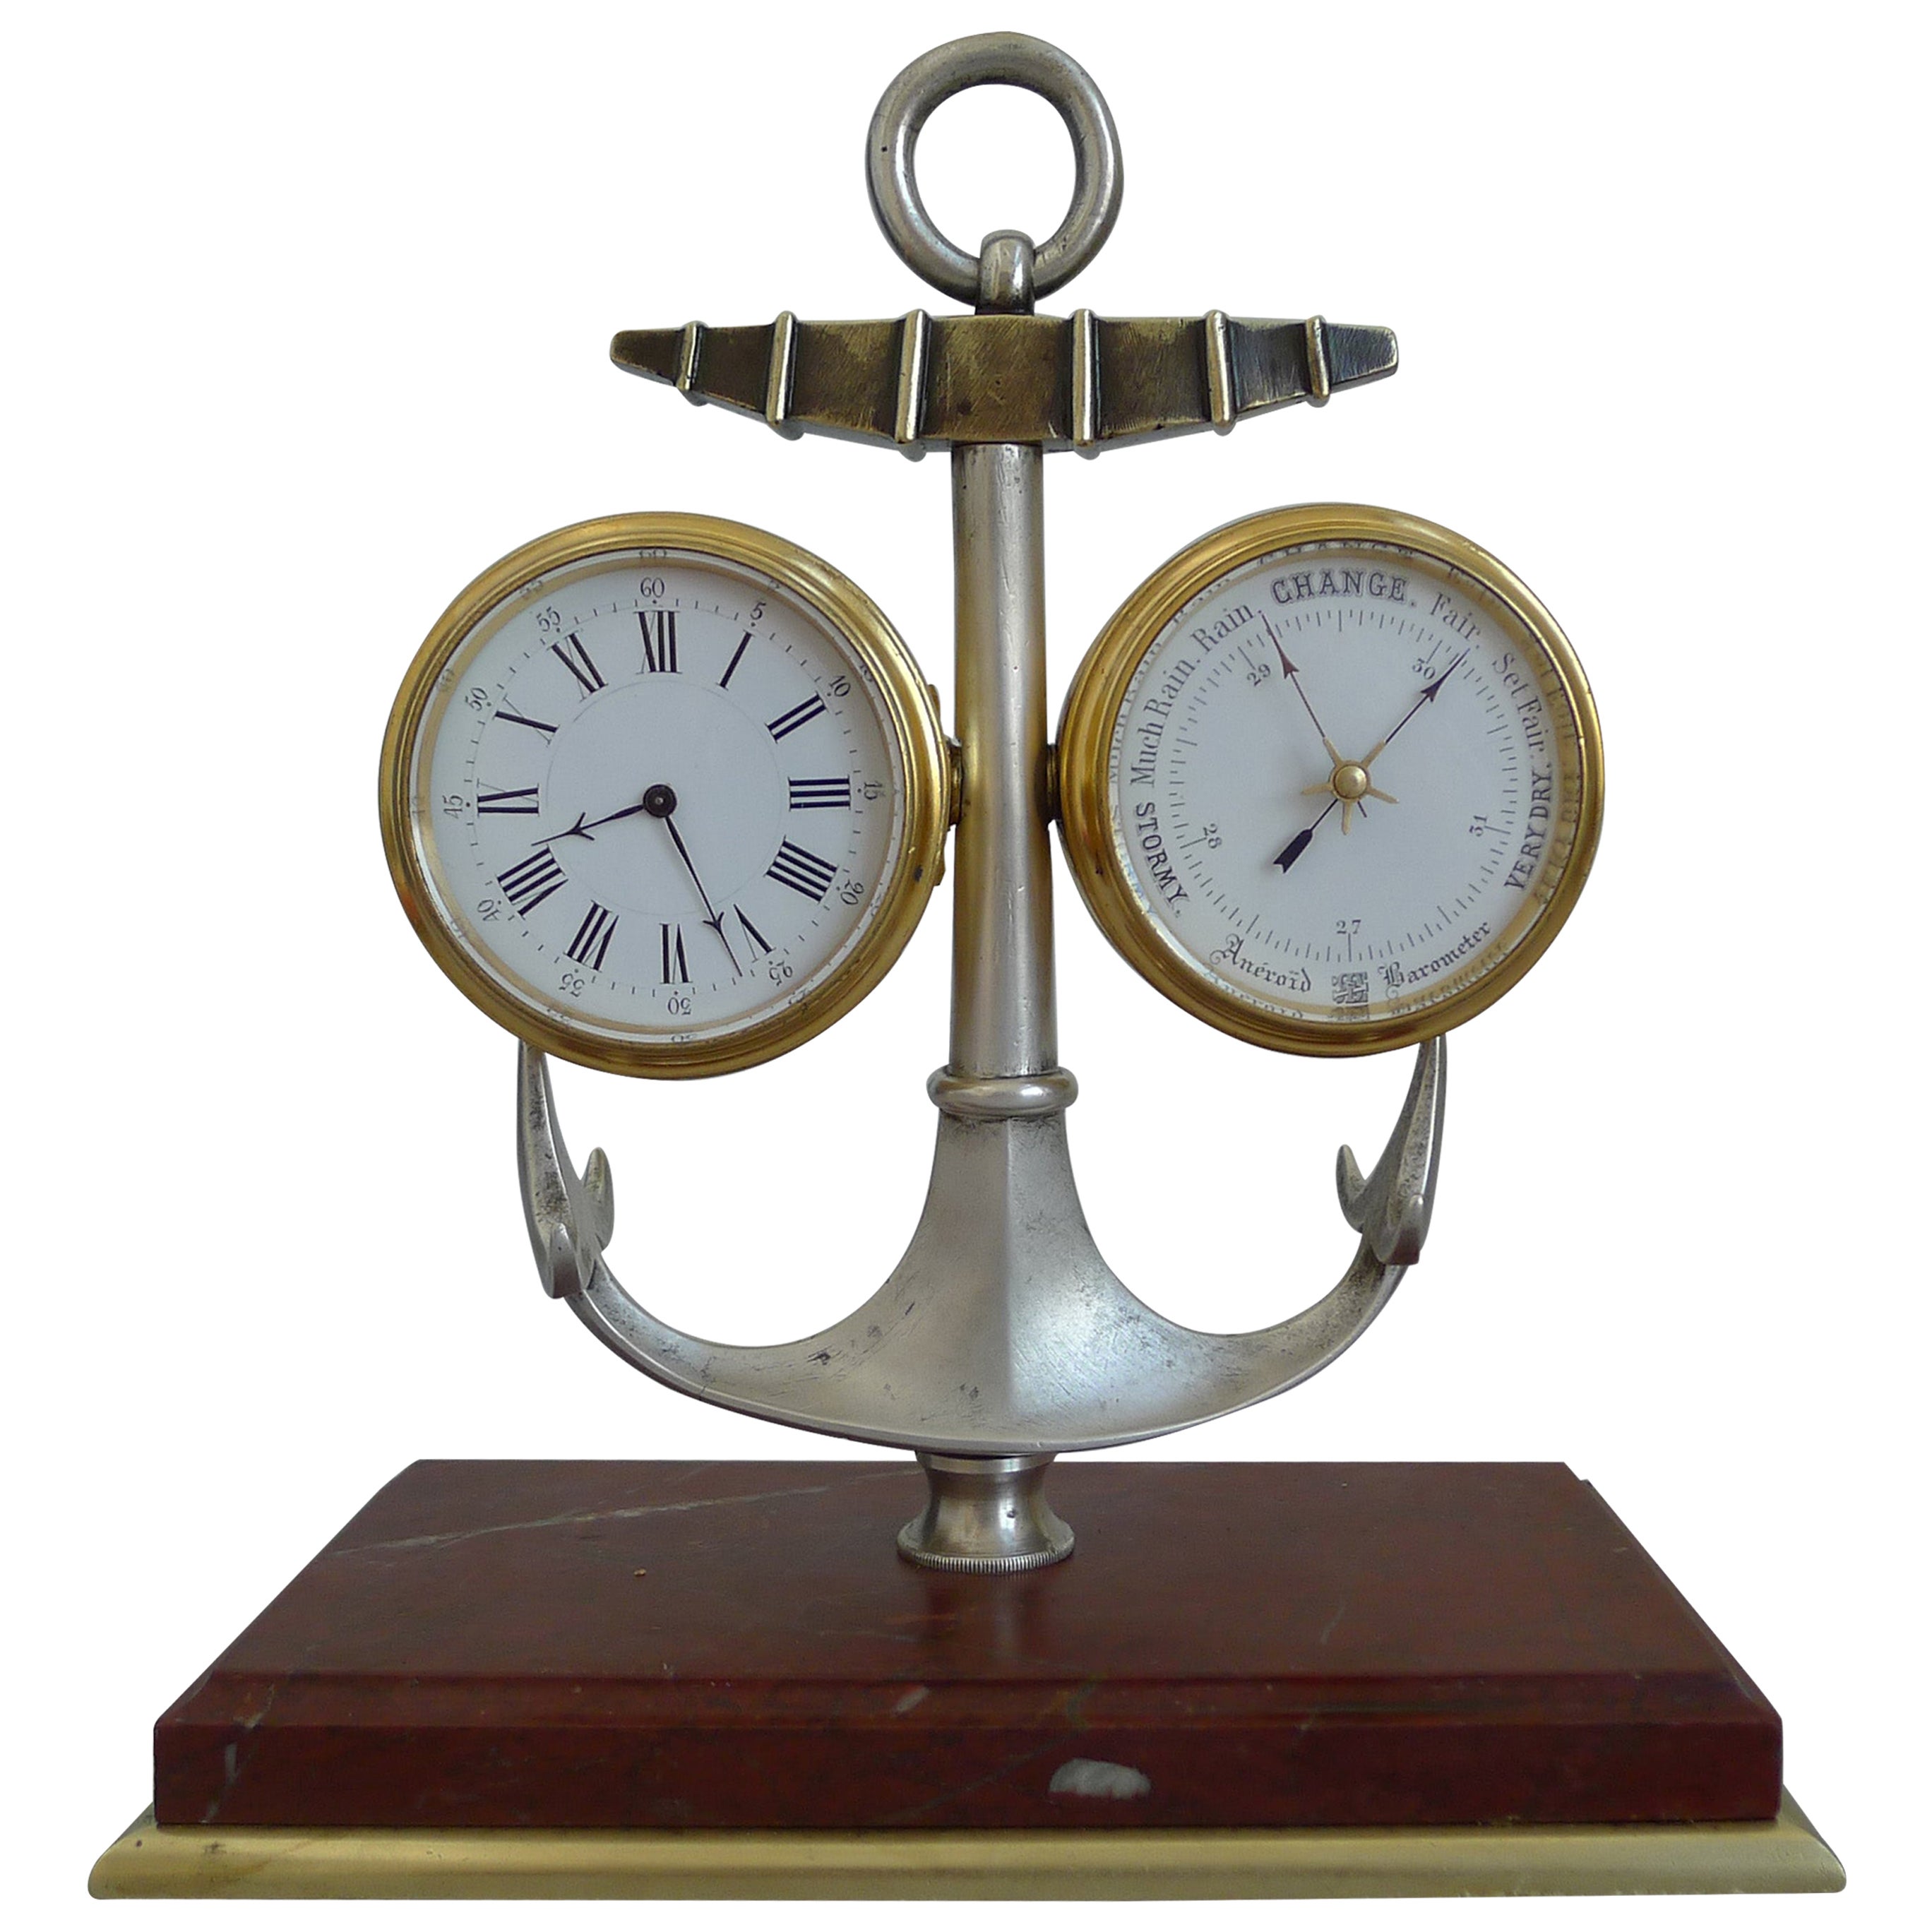  Industrial Series Marine small deskset of clock, barometer and thermometer For Sale